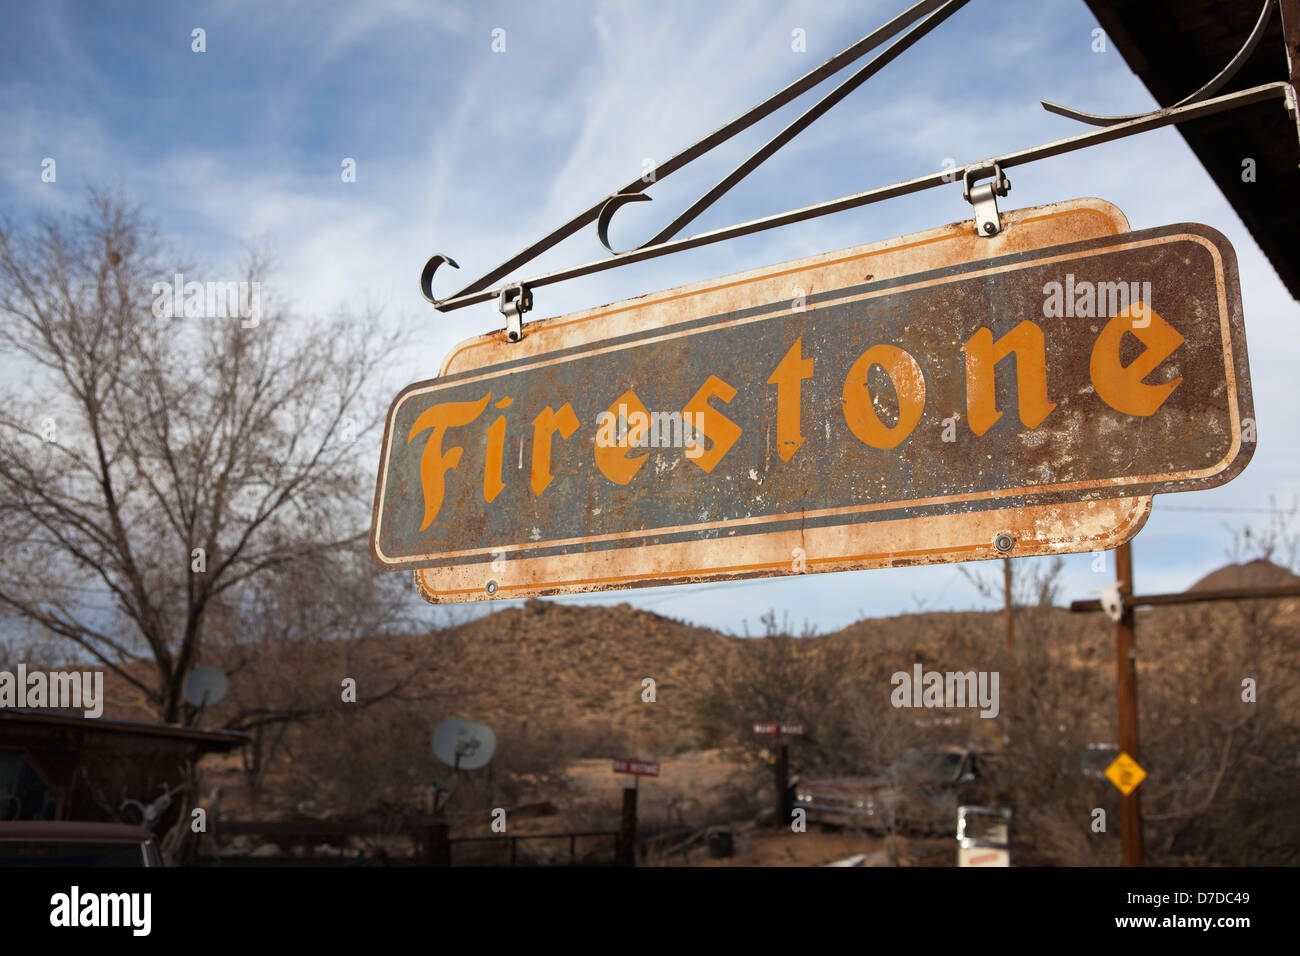 A Firestone sign at route 66 in Hackberry, Arizona, USA Stock Photo